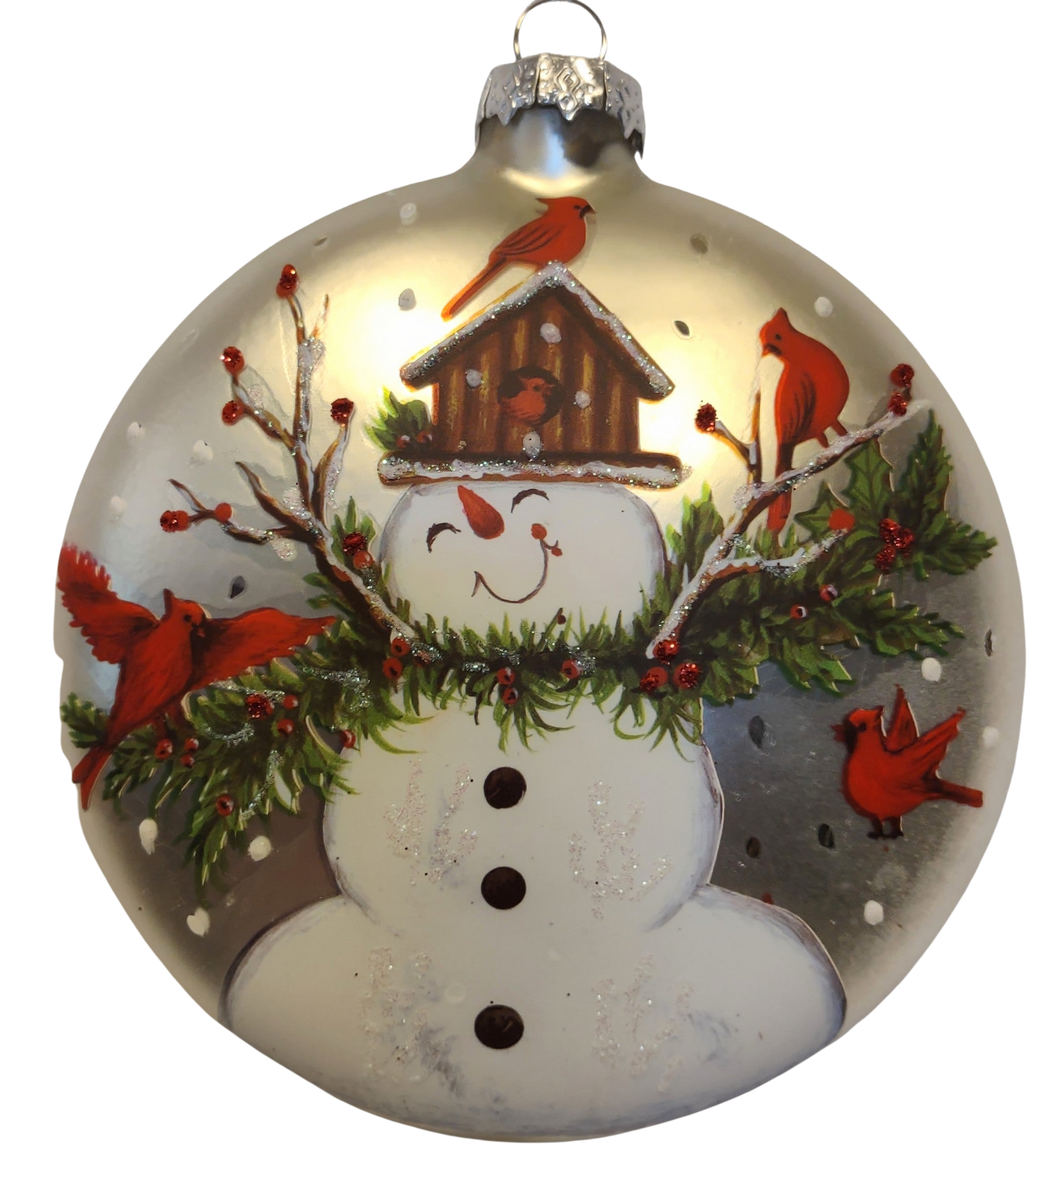 Glass Hand Painted Snowman Ornament with Winter Scene/Red Cardinals/Bird House